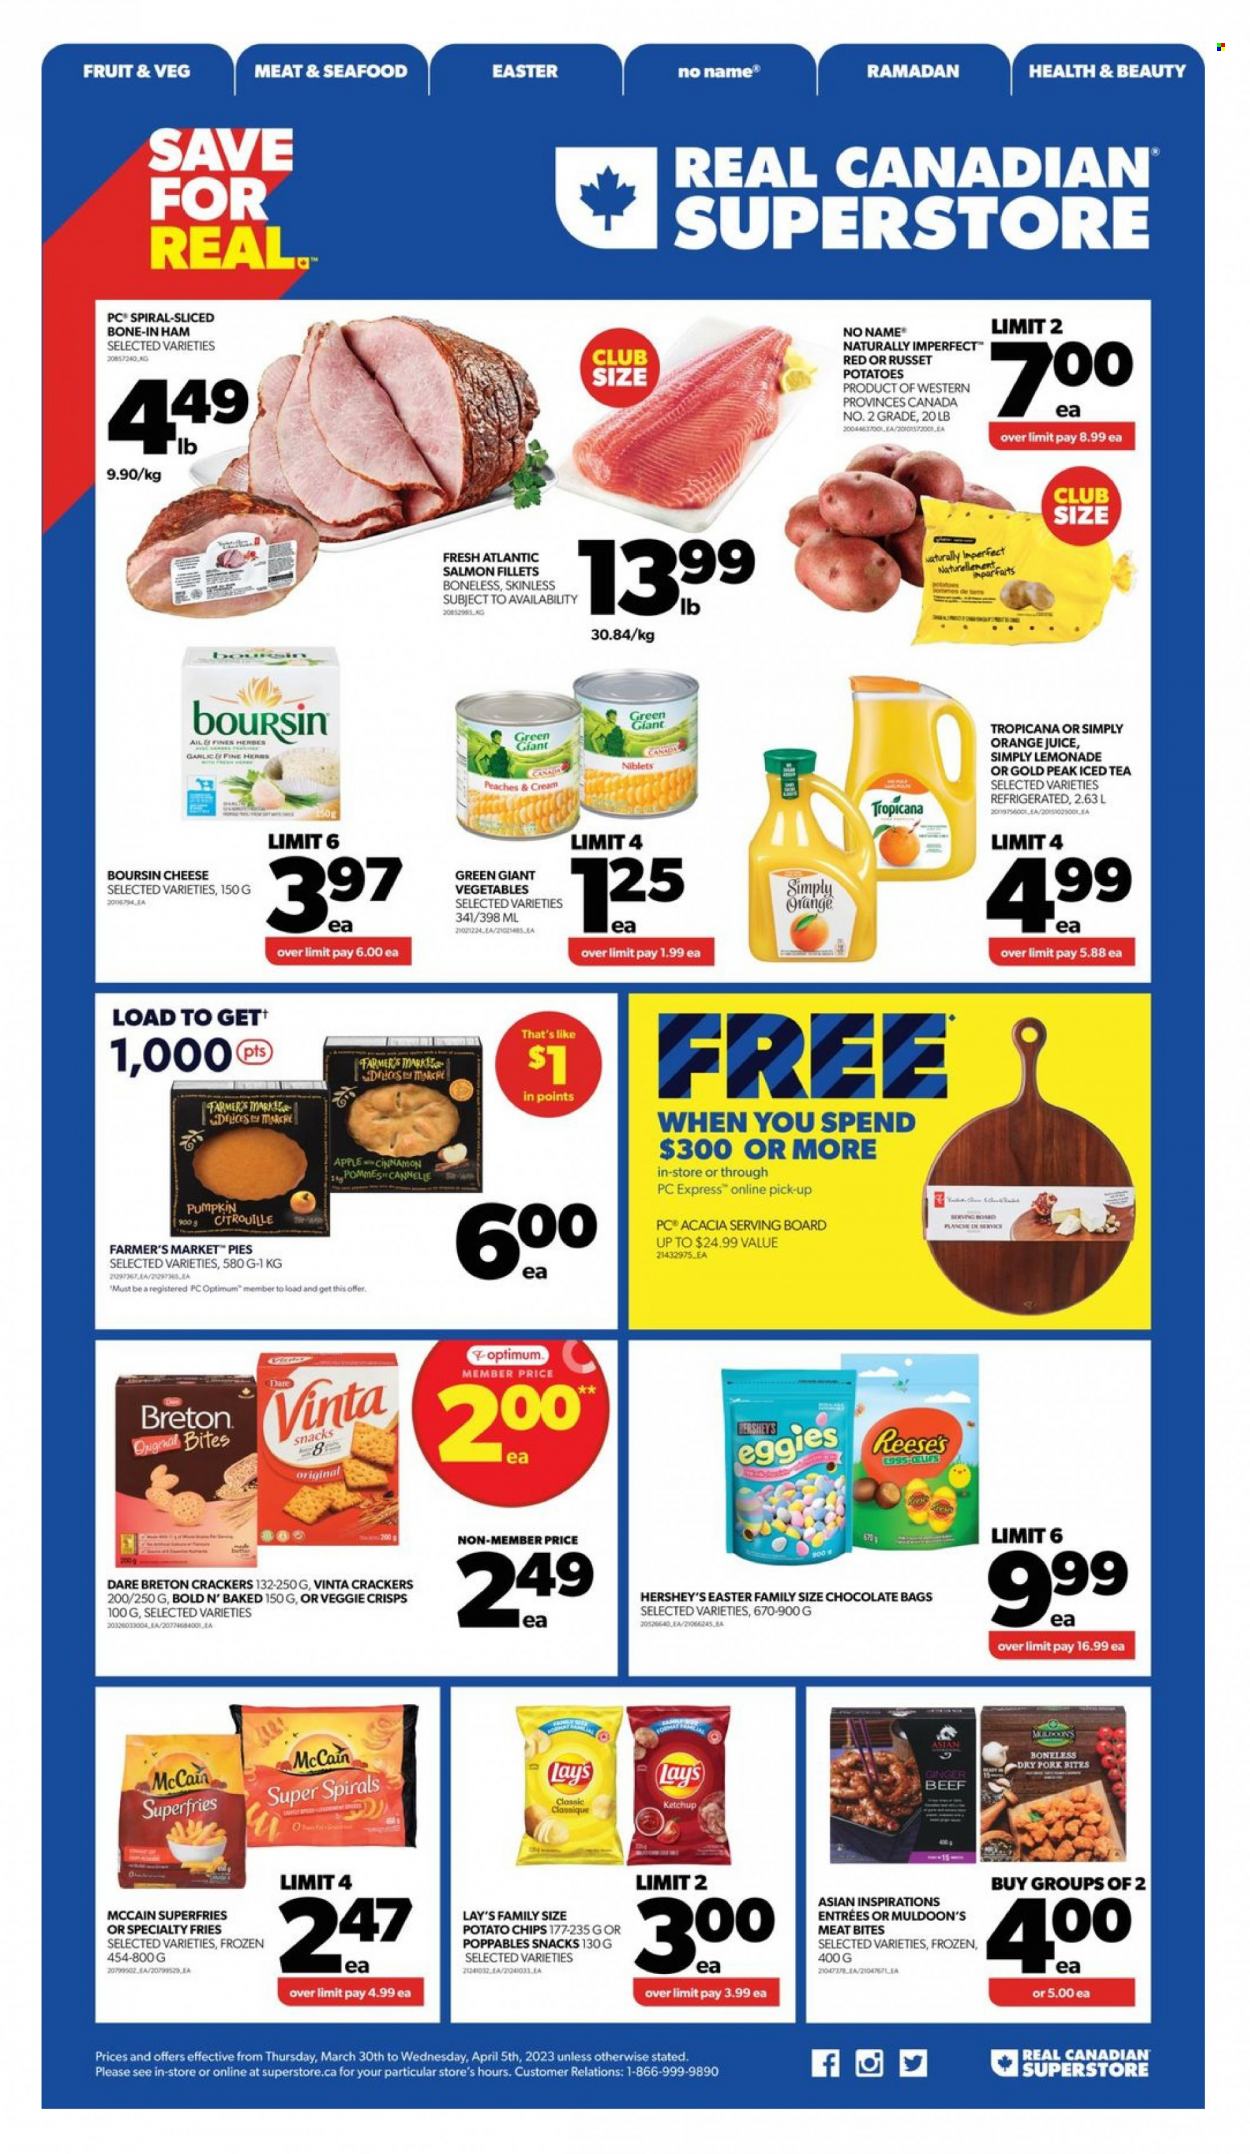 thumbnail - Circulaire Real Canadian Superstore - 30 Mars 2023 - 05 Avril 2023 - Produits soldés - ail, citrouille, pommes, McCain, chips, crackers, Lay’s, cannelle, Apple, Boursin, Tropicana. Page 1.